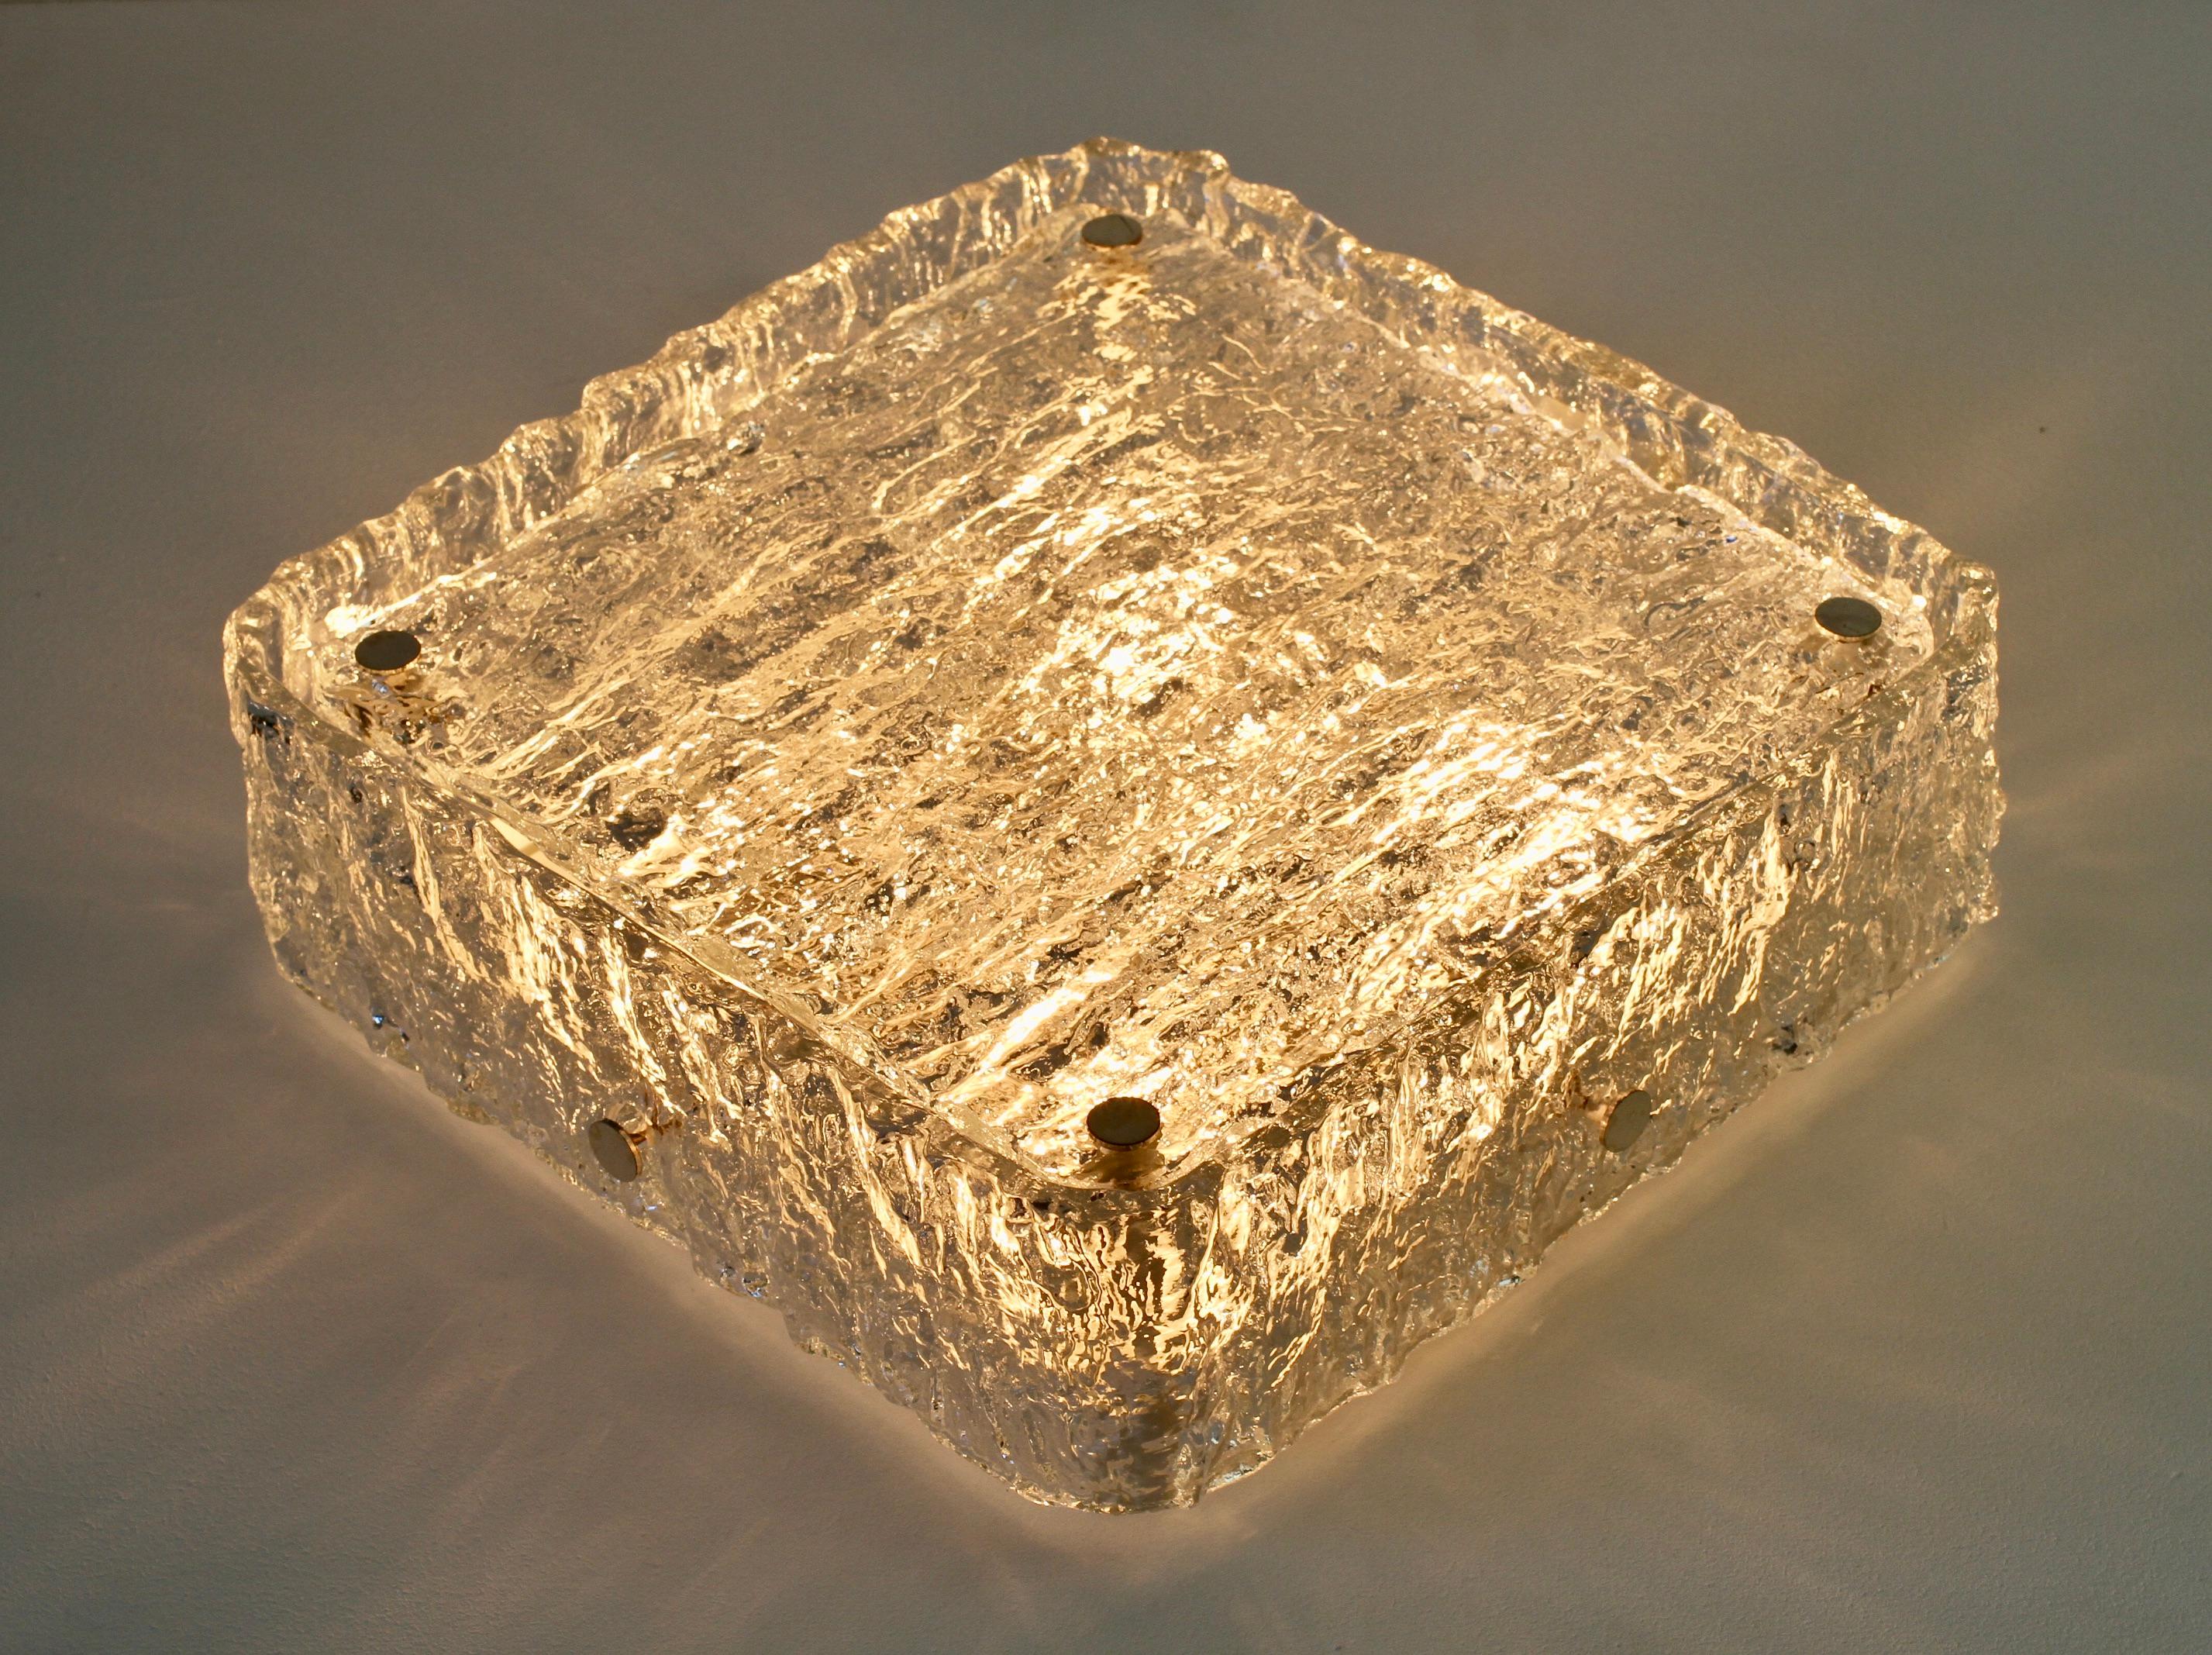 Vintage Mid-Century Modern square 33cm (13 inch) thick textured glass flush mount by Kaiser Leuchten, circa 1960s-1970s. Wonderfully formed 'ice' glass shade of textured structured clear glass. This glass design illuminates beautifully, giving a